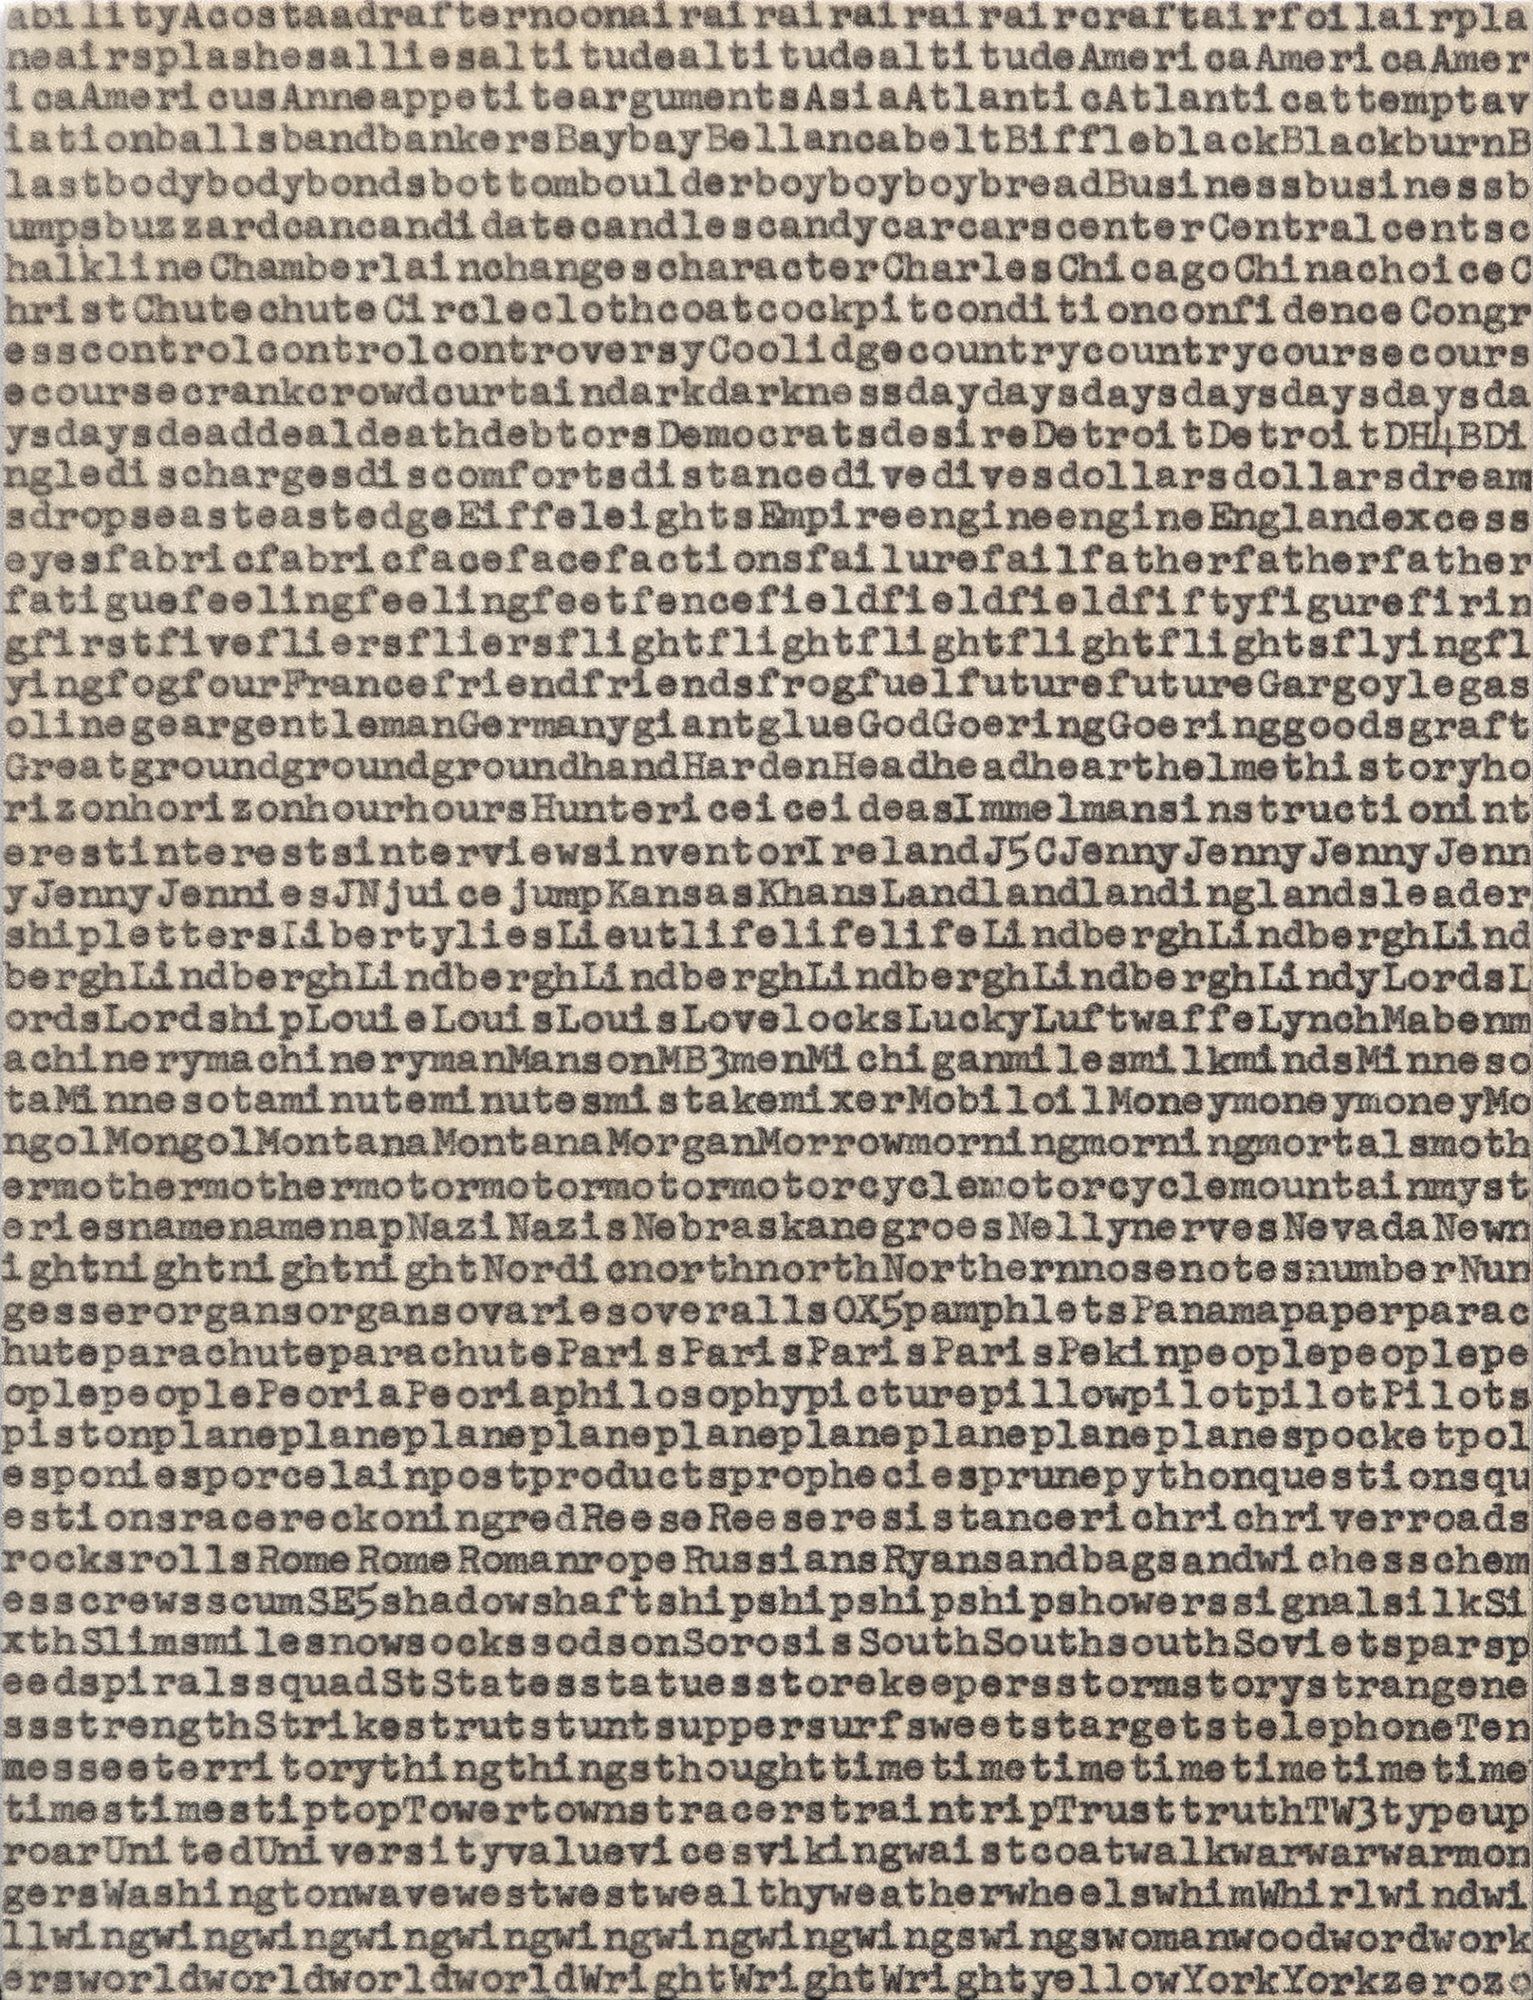 Carl Andre is an American artist who helped pioneer minimalist sculpture and was the husband of famed and celebrated artist Ana Mendieta. This is a classic text piece from the early 1960s and is typical of his poems which are composed by selecting individual words from source texts, and then ordering them on the page according to simple and self-evident criteria, which, in this case, is by alphabetical listing. Aviator Charles Lindbergh deep fascinated Carl Andre whom he returned to as a source for his poetry. This work with its structured repetition like his famed sculptures reflect the minimalism and post-minimalism emerging in the 1960s and the 1970s including fellow concrete poet Christopher Knowles.